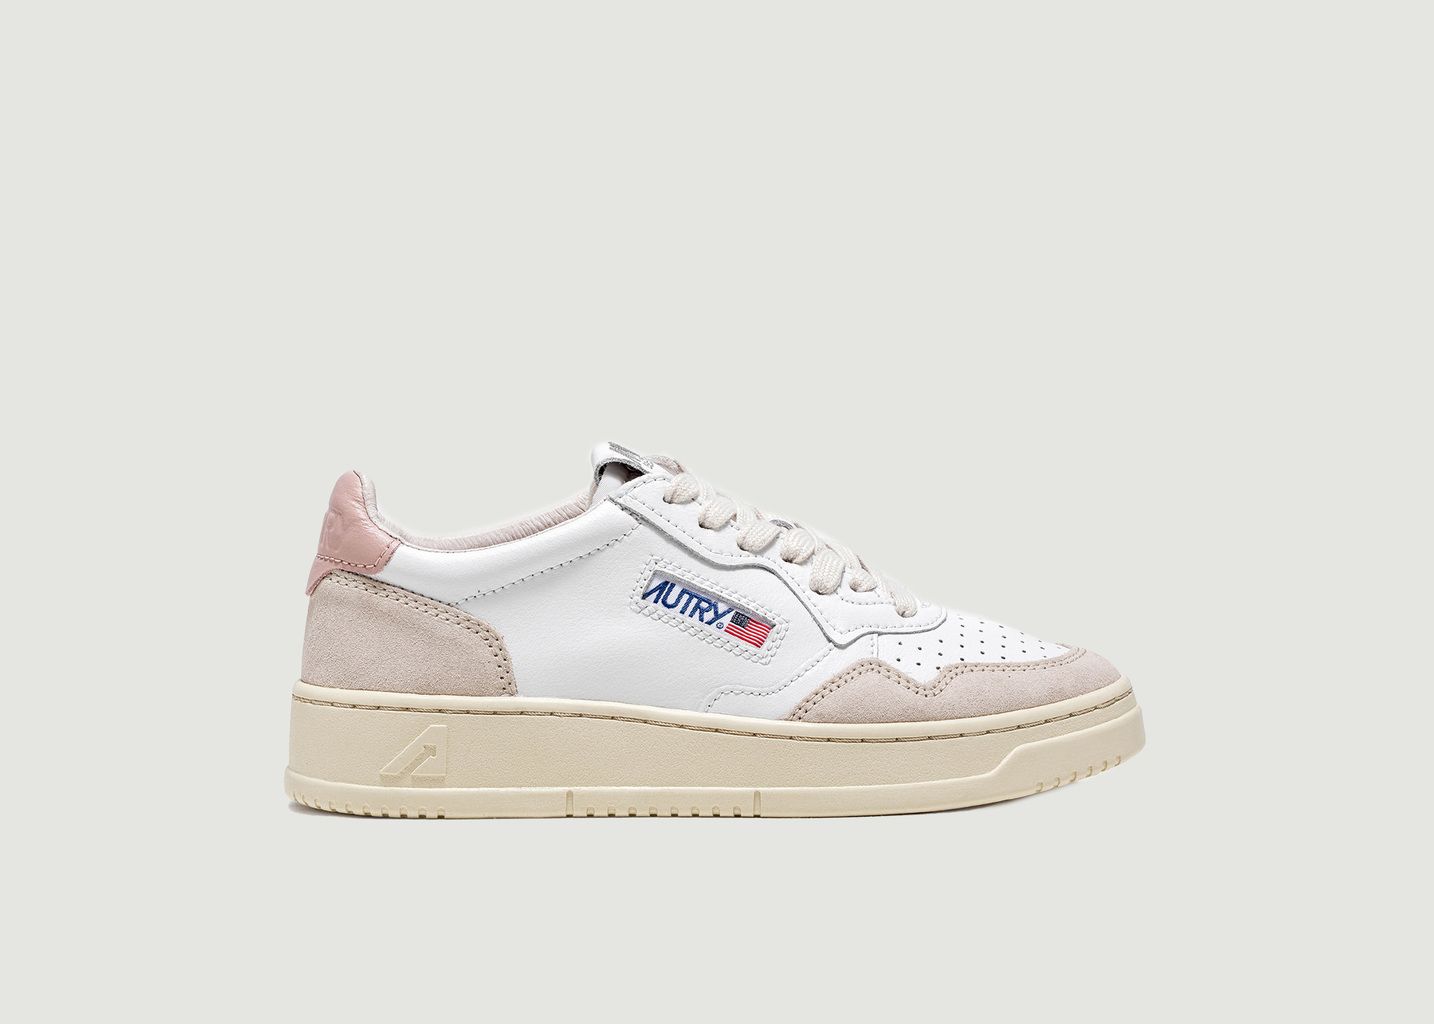 Autry Medalist Low Sneakers In White and Powder Pink Leather